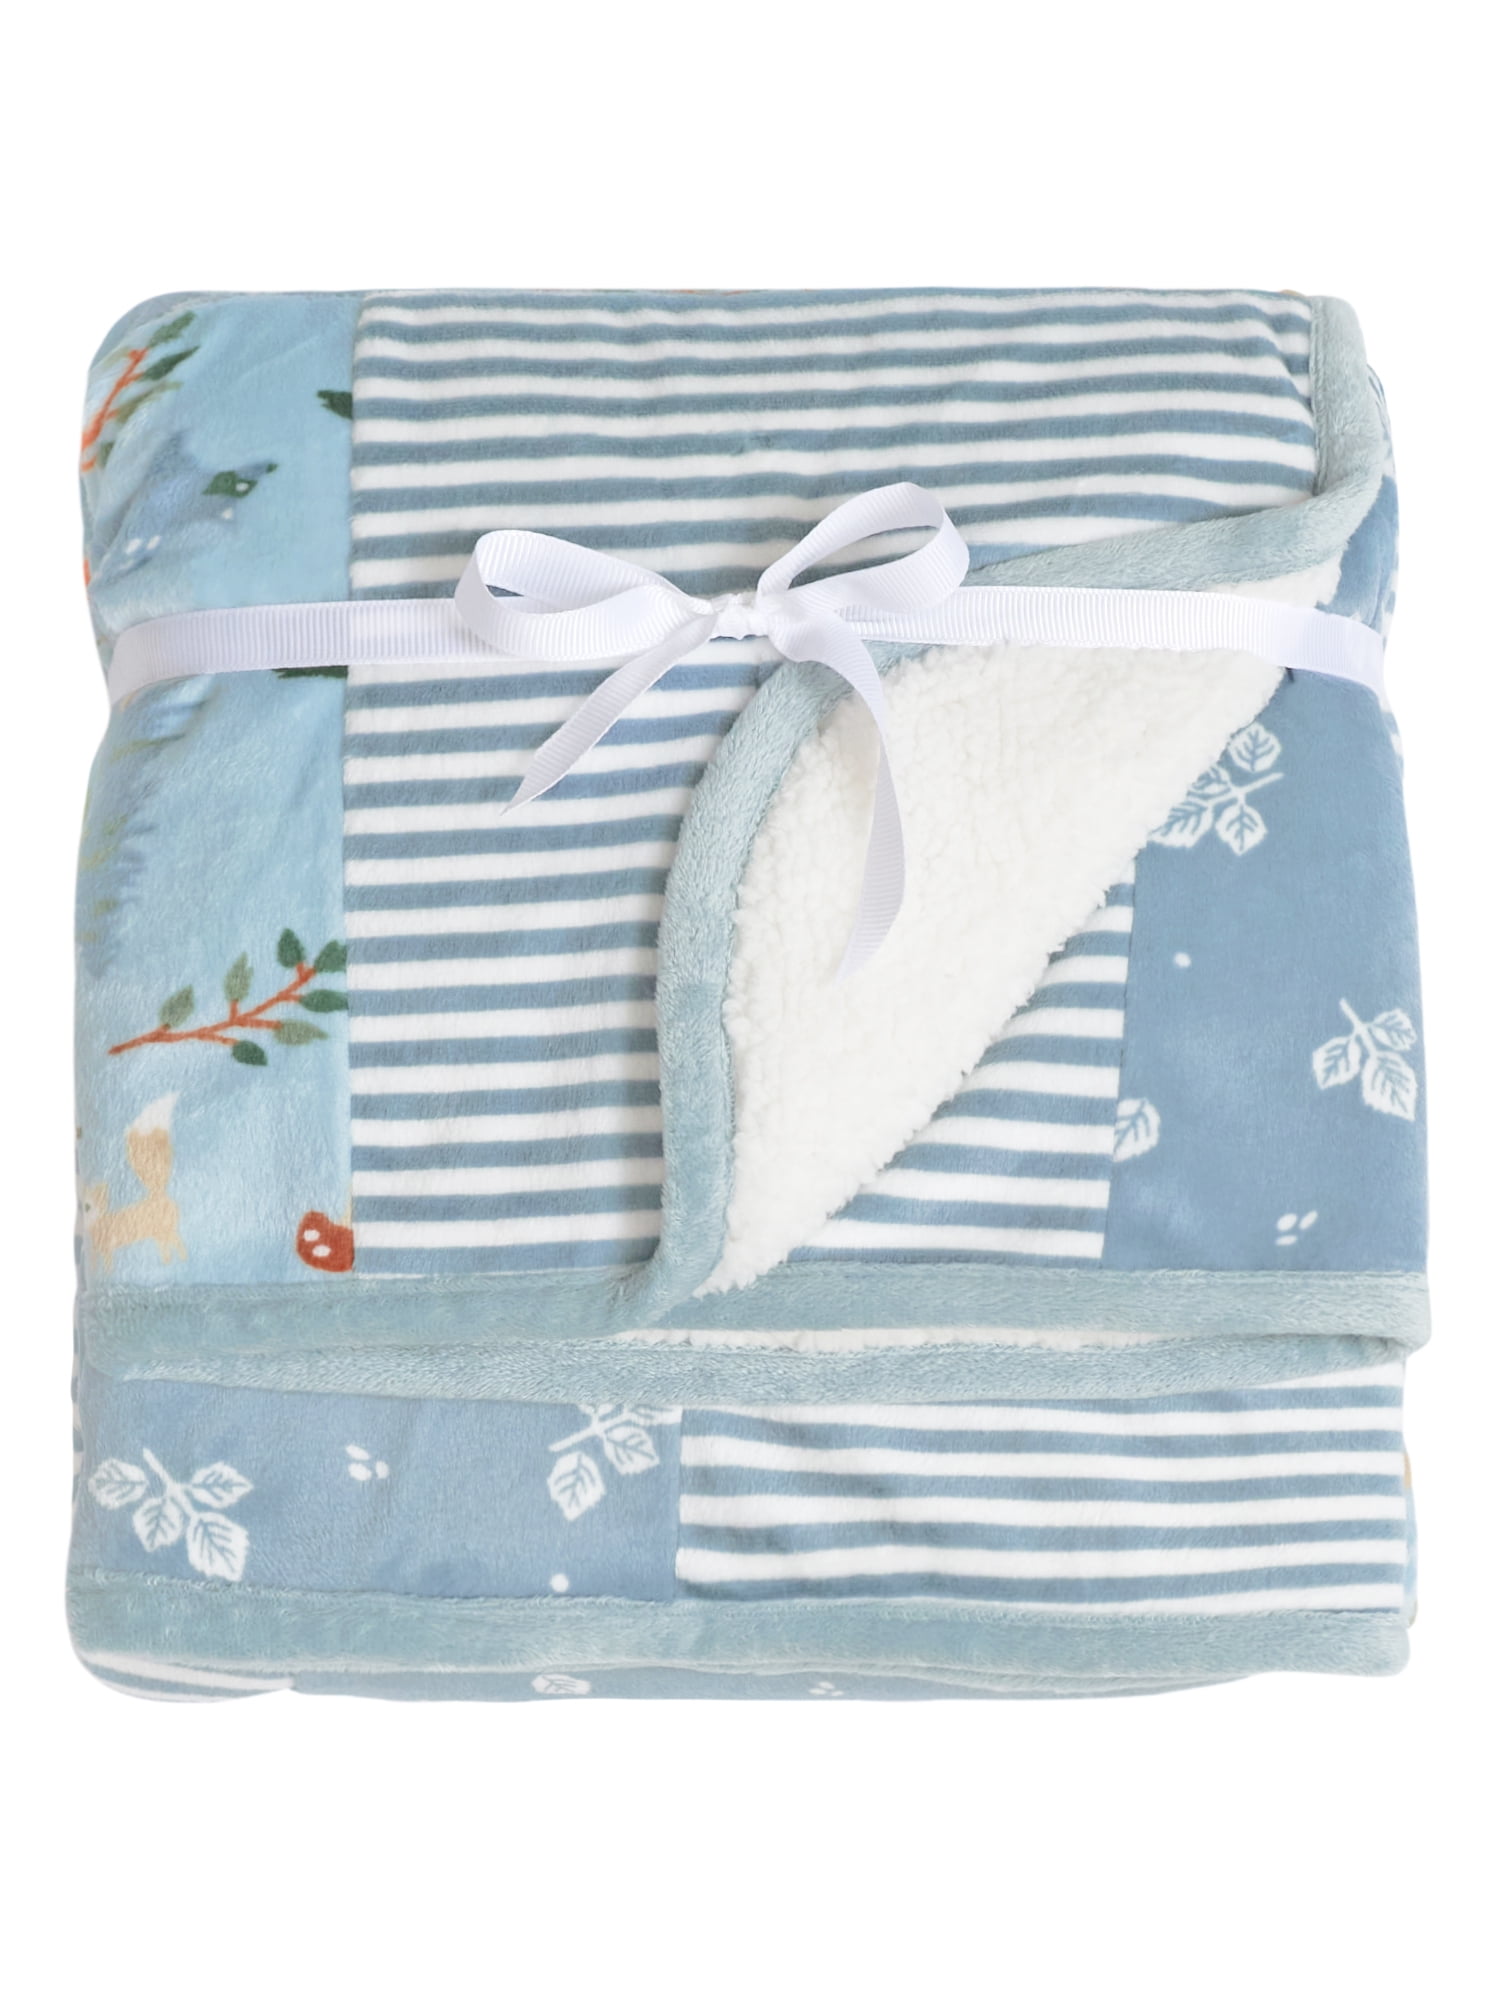 NEW & Free Shipping 36x40 in Baby Receiving Blankets 2 DZ 